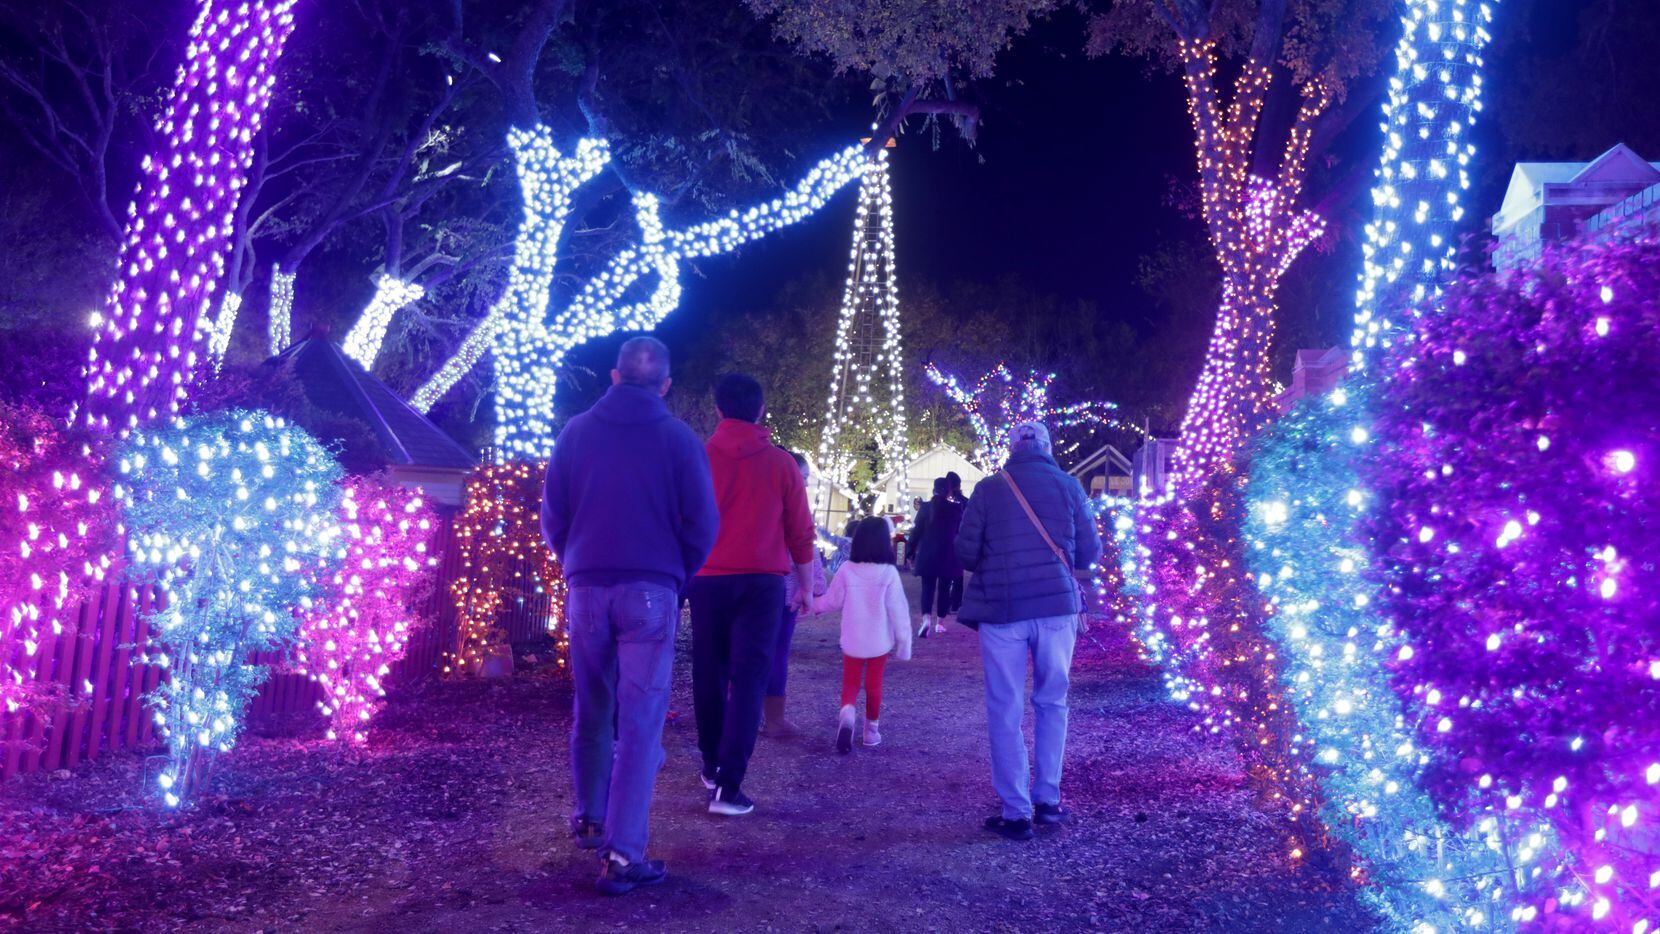 The holiday lights display at Heritage Farmstead Museum in Plano